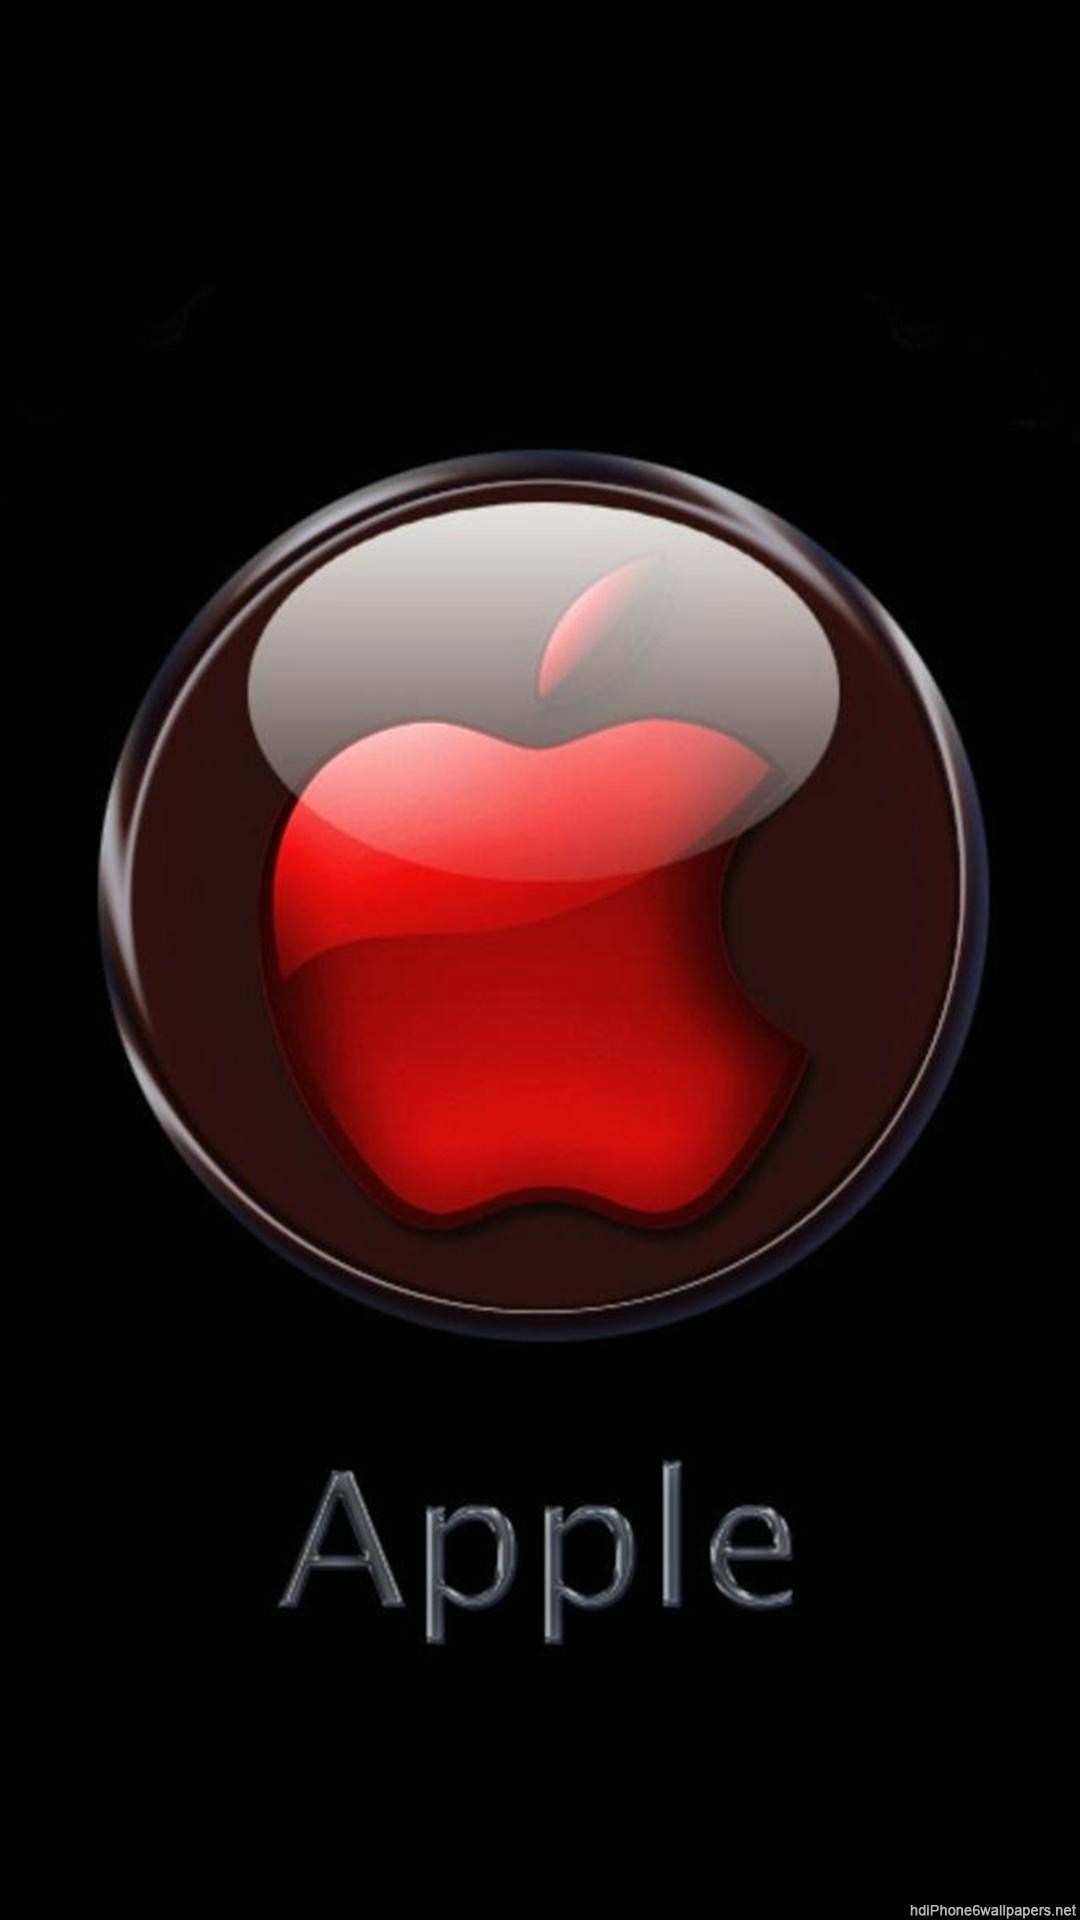 Puter Apple iPhone 6 Wallpaper HD And 1080p 6 Plus